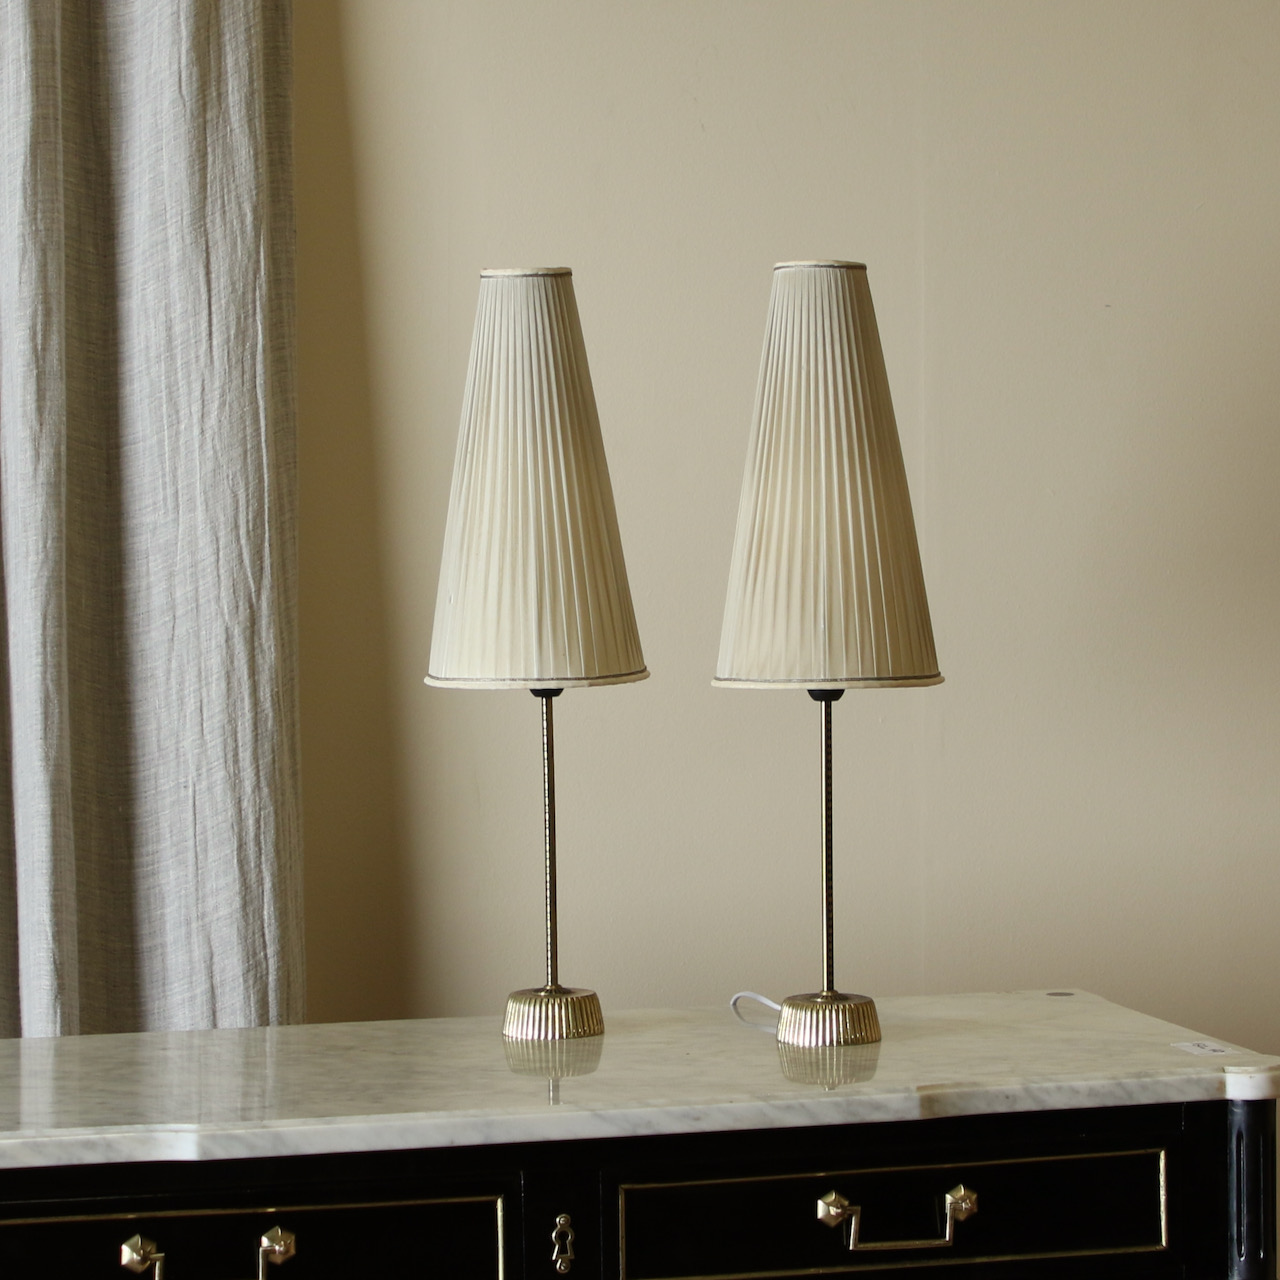 Pair of French Lamps with Pleated Shades